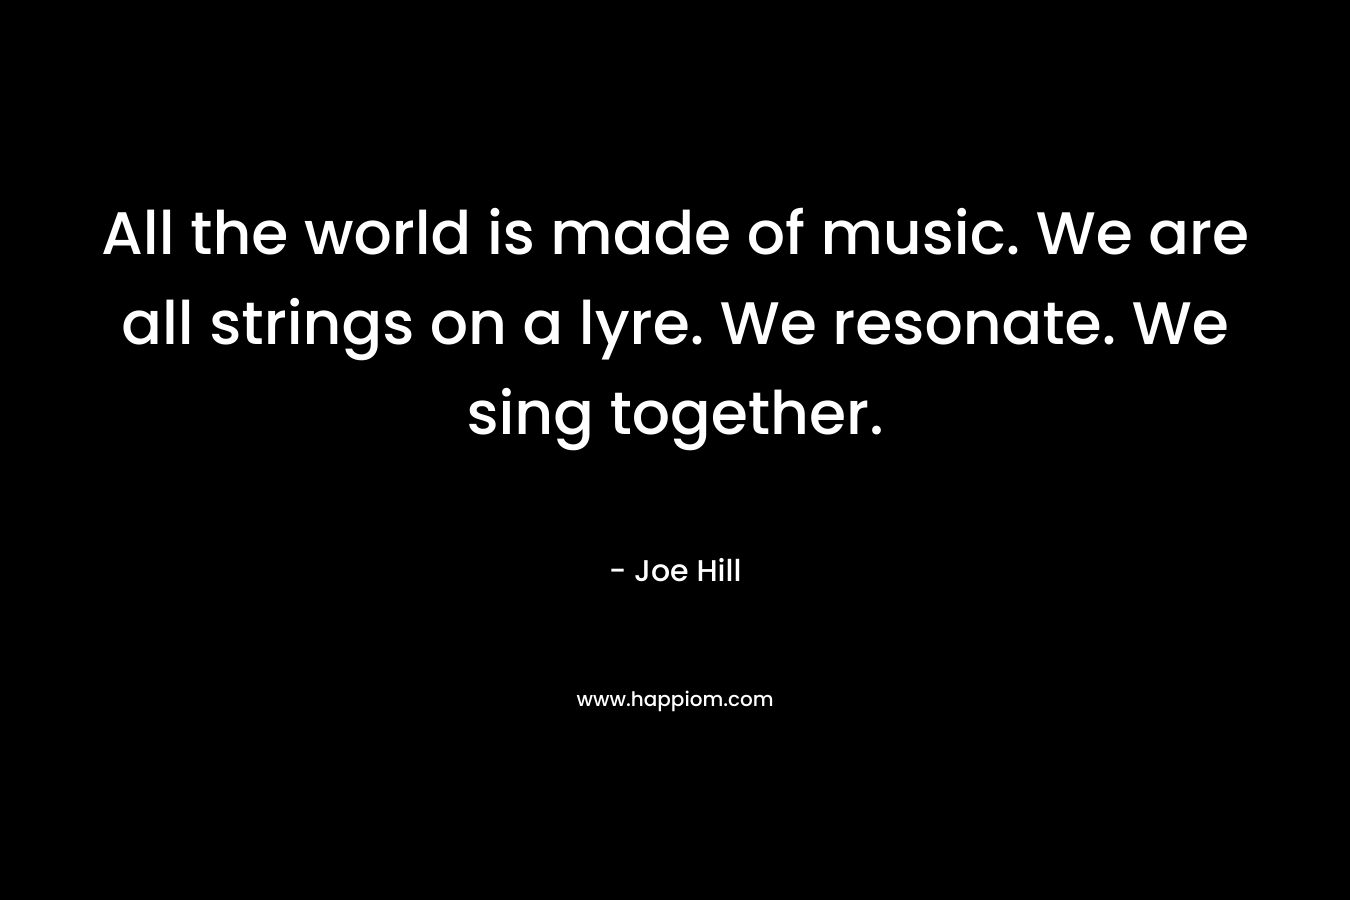 All the world is made of music. We are all strings on a lyre. We resonate. We sing together. – Joe Hill